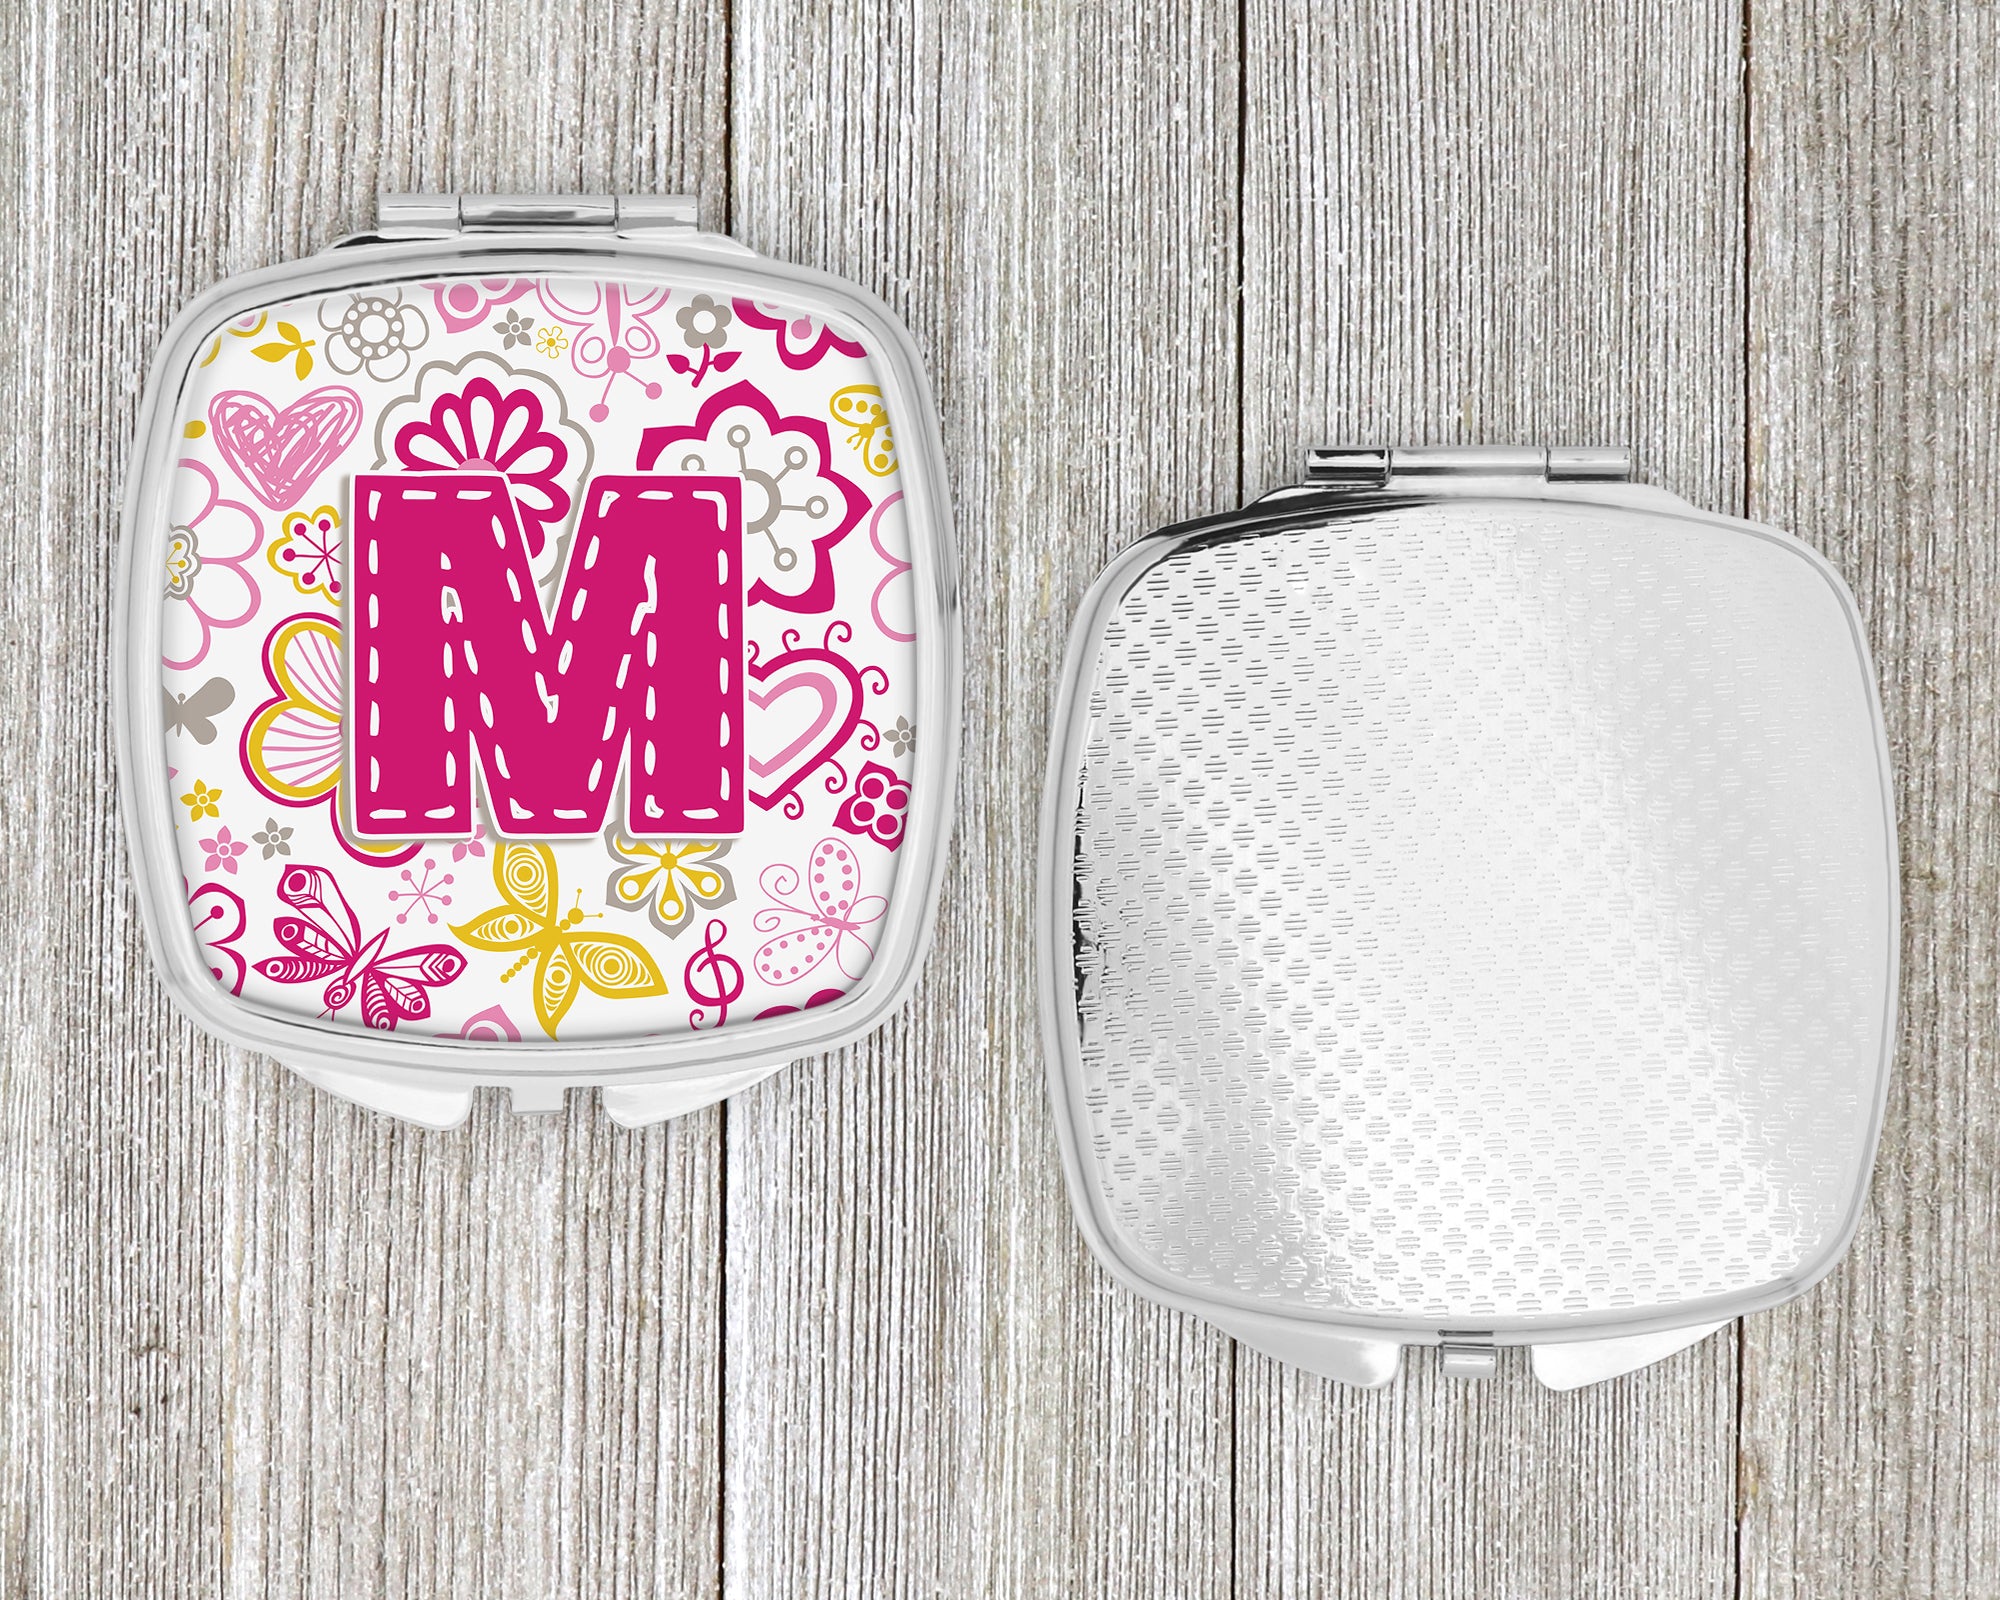 Letter M Flowers and Butterflies Pink Compact Mirror CJ2005-MSCM